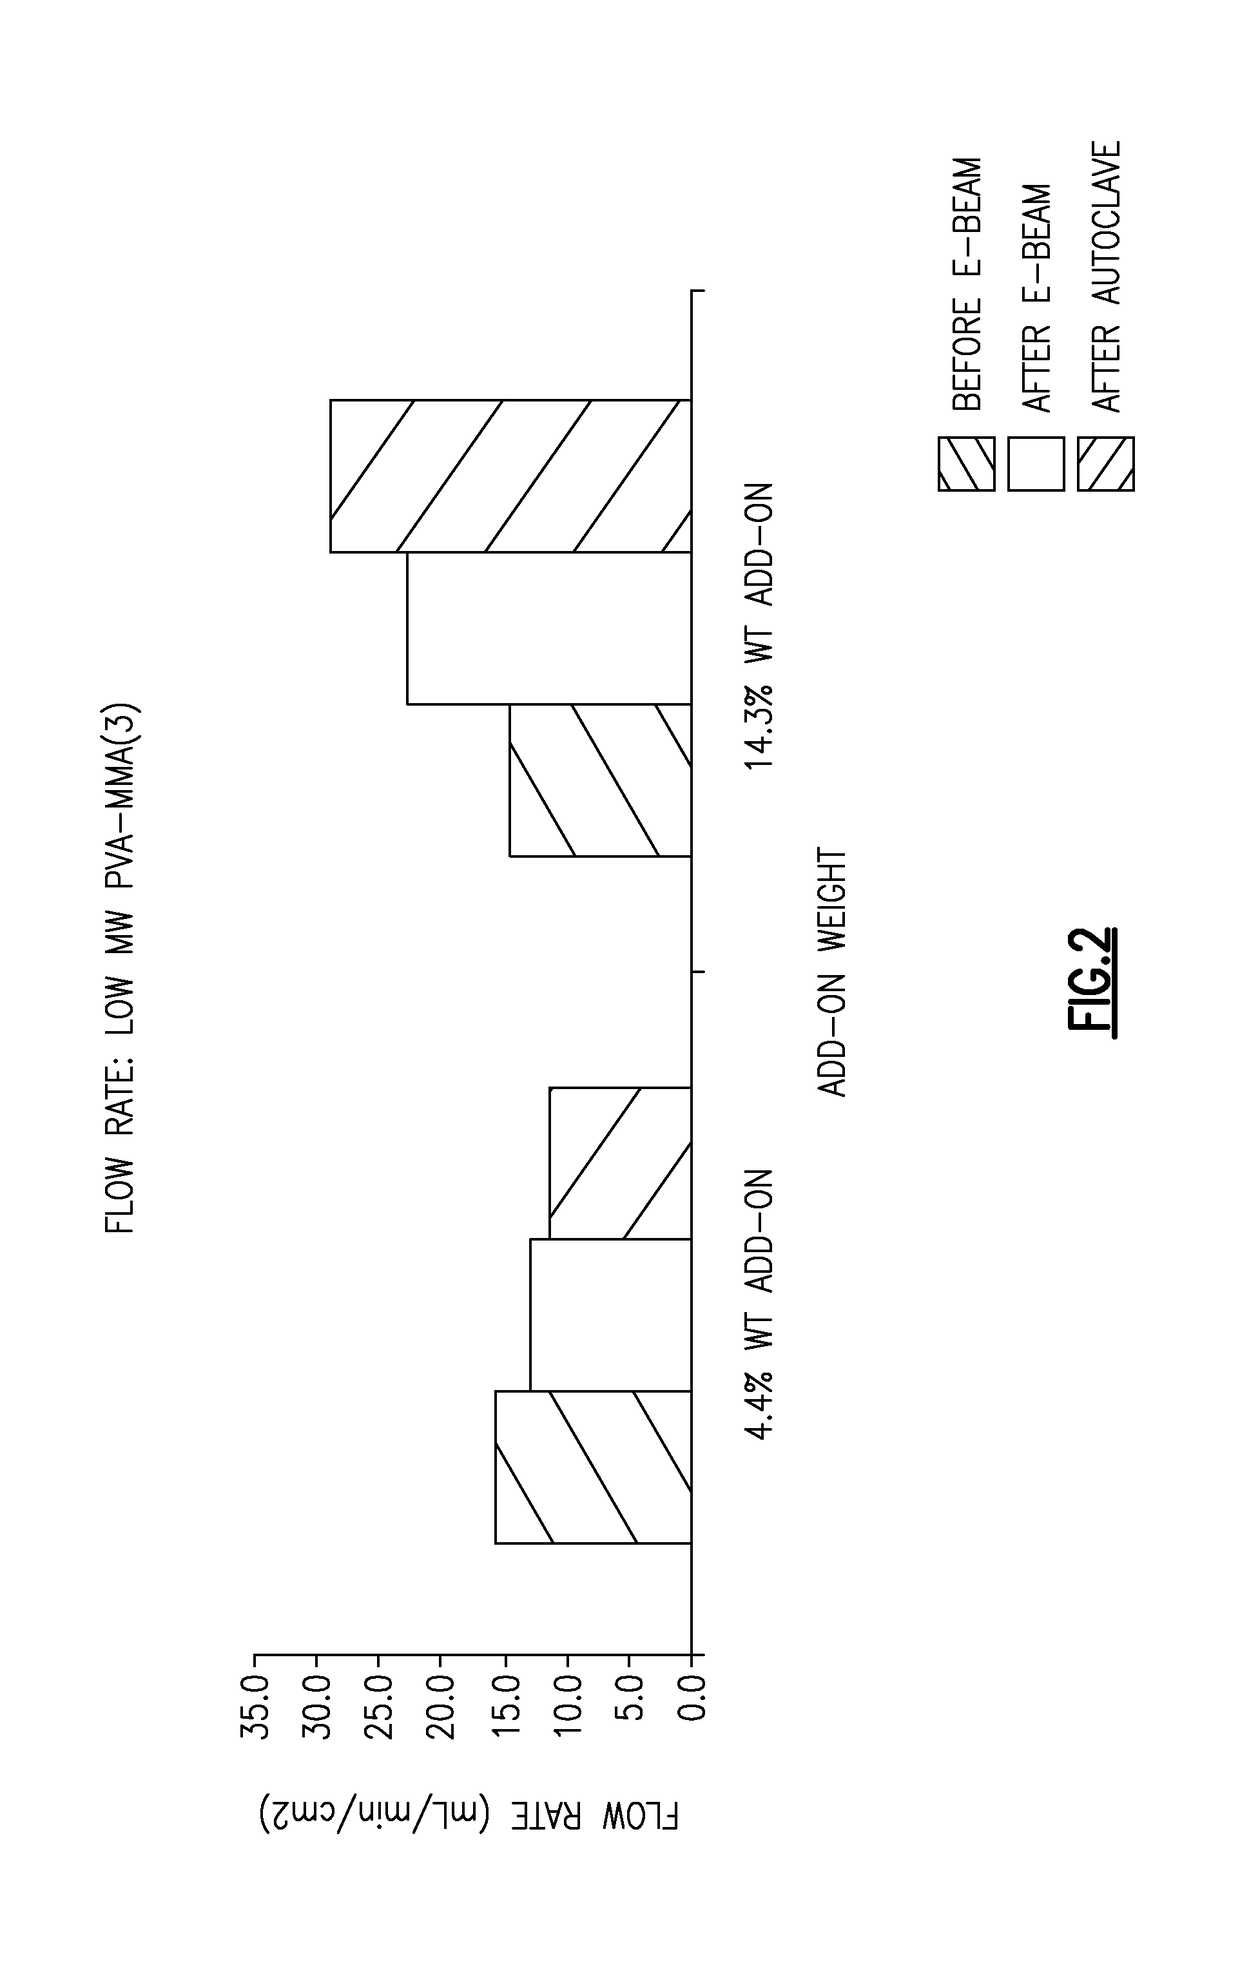 Permanent hydrophilic porous coatings and methods of making them